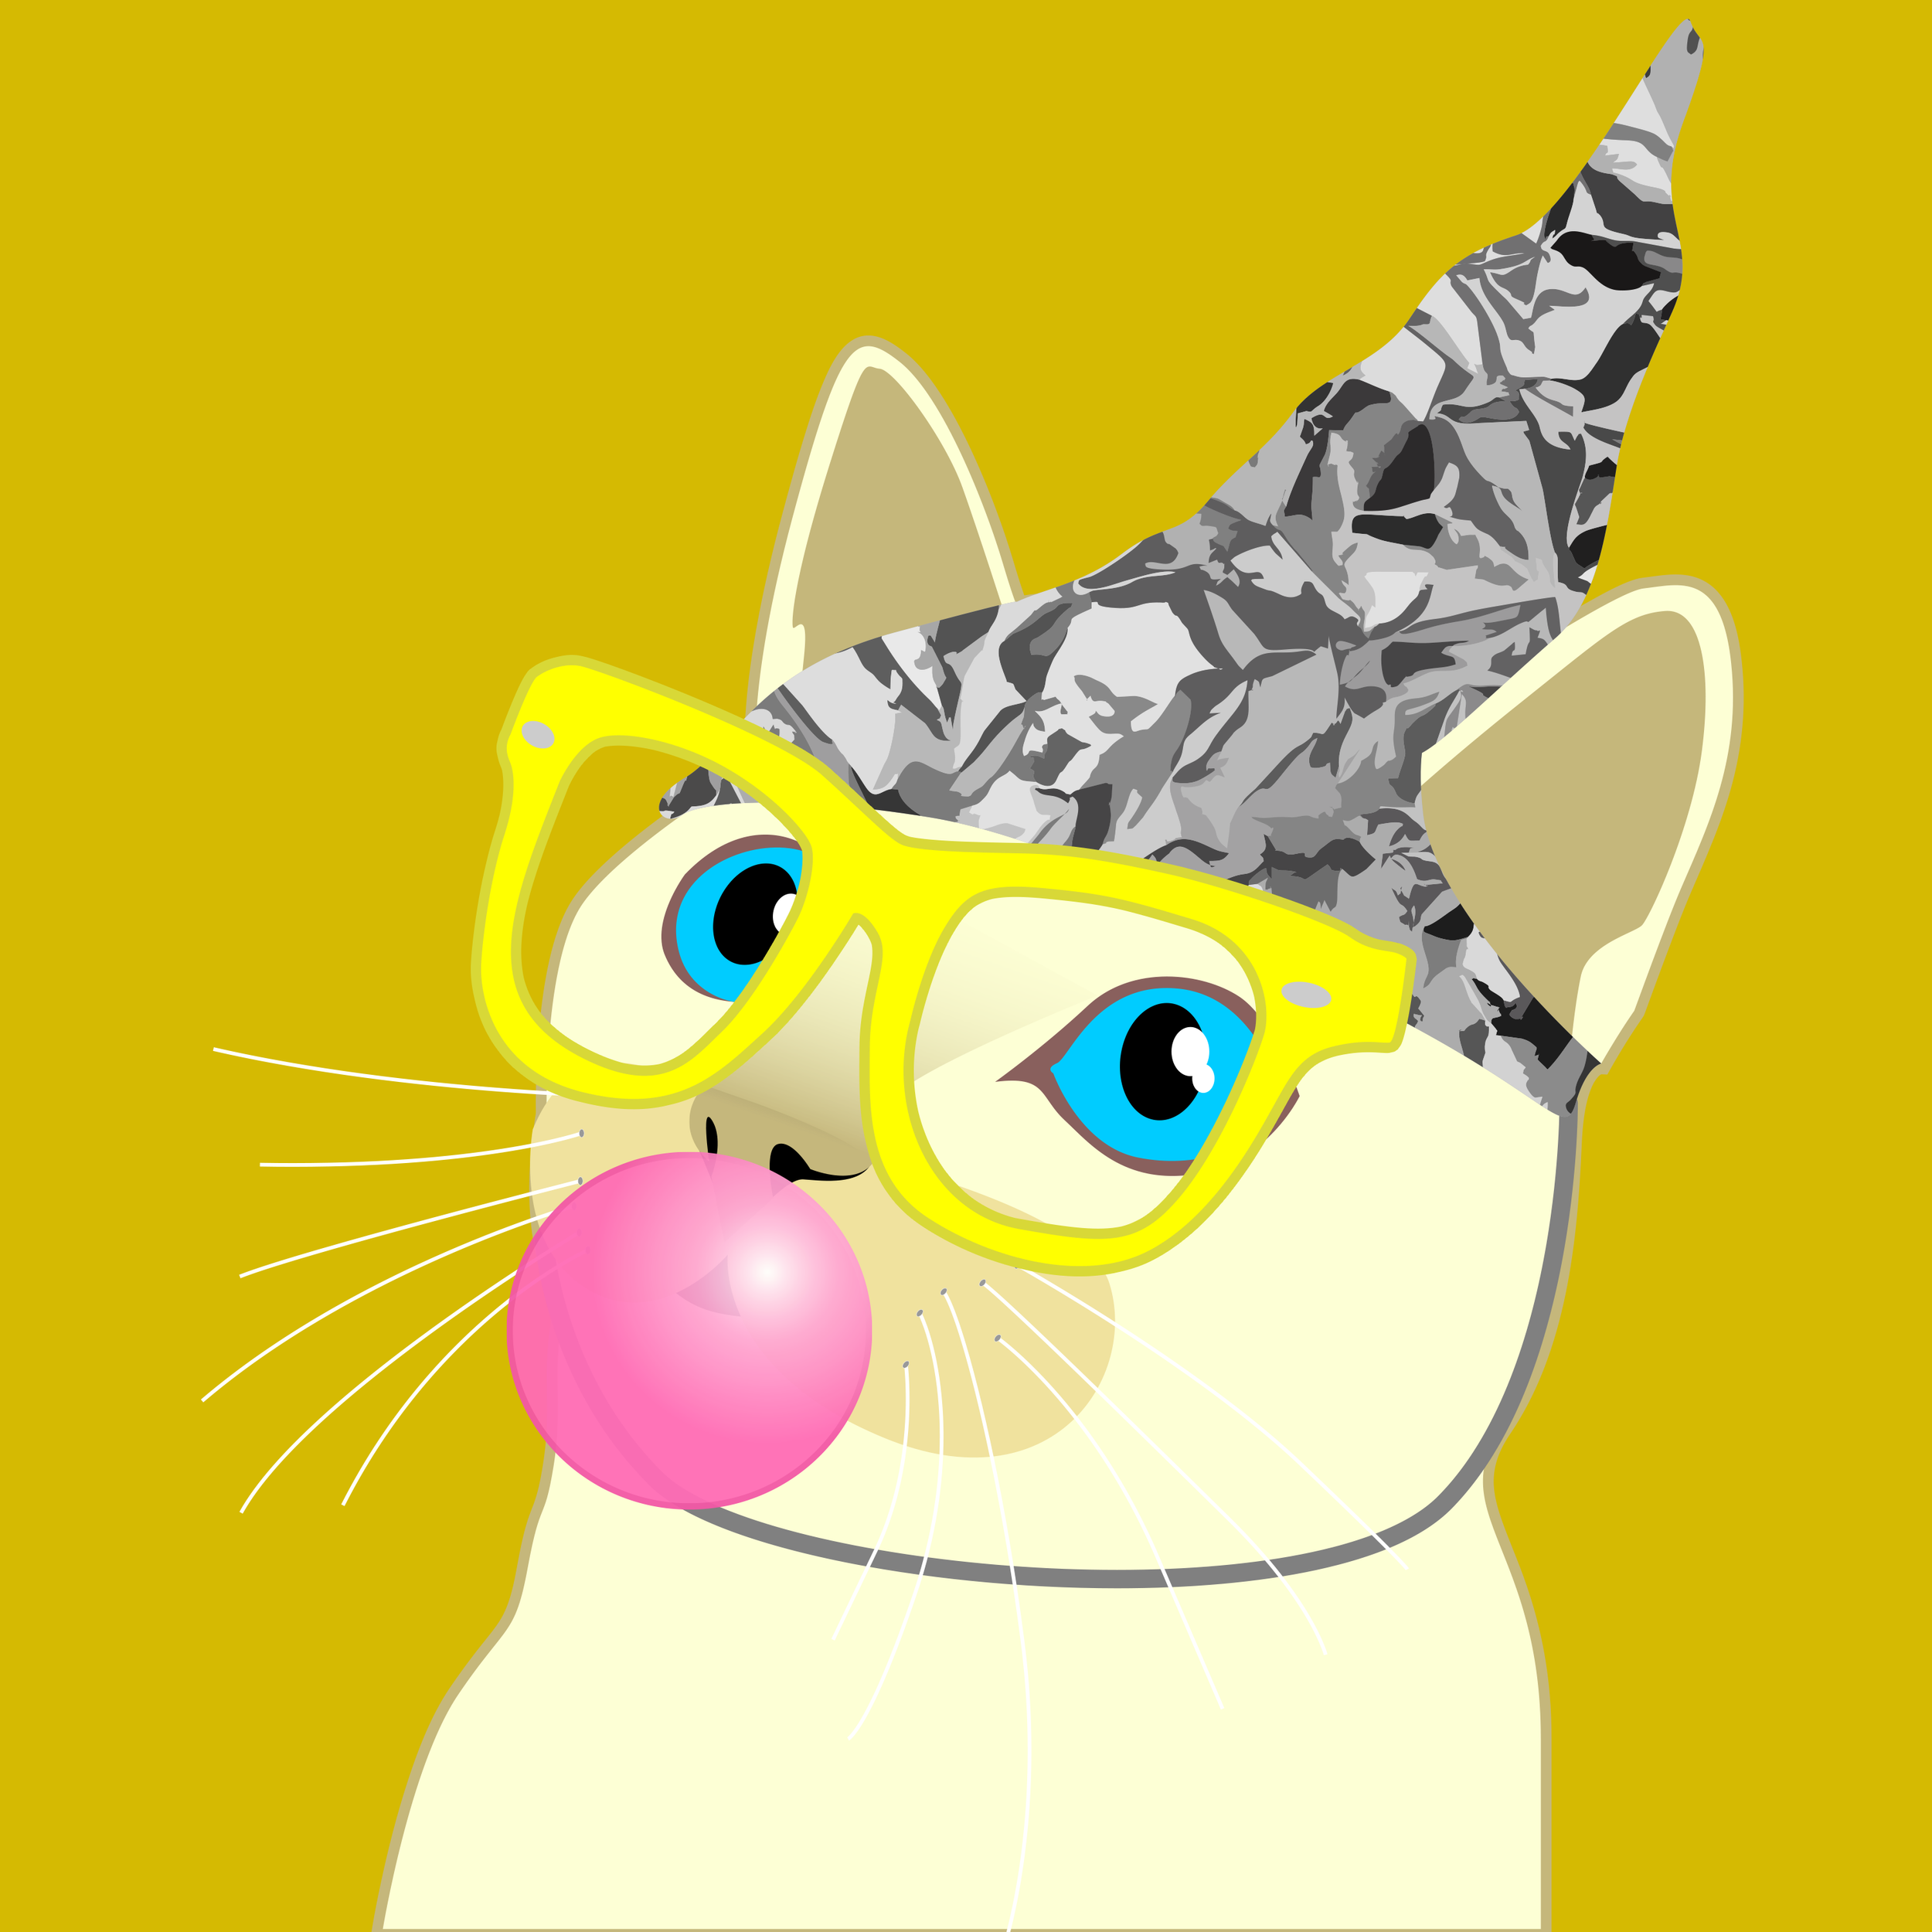 Is Tin Foil Cats The Best Solana NFT Projects For Maximum Gains in 2024 Crypto Bull Run?